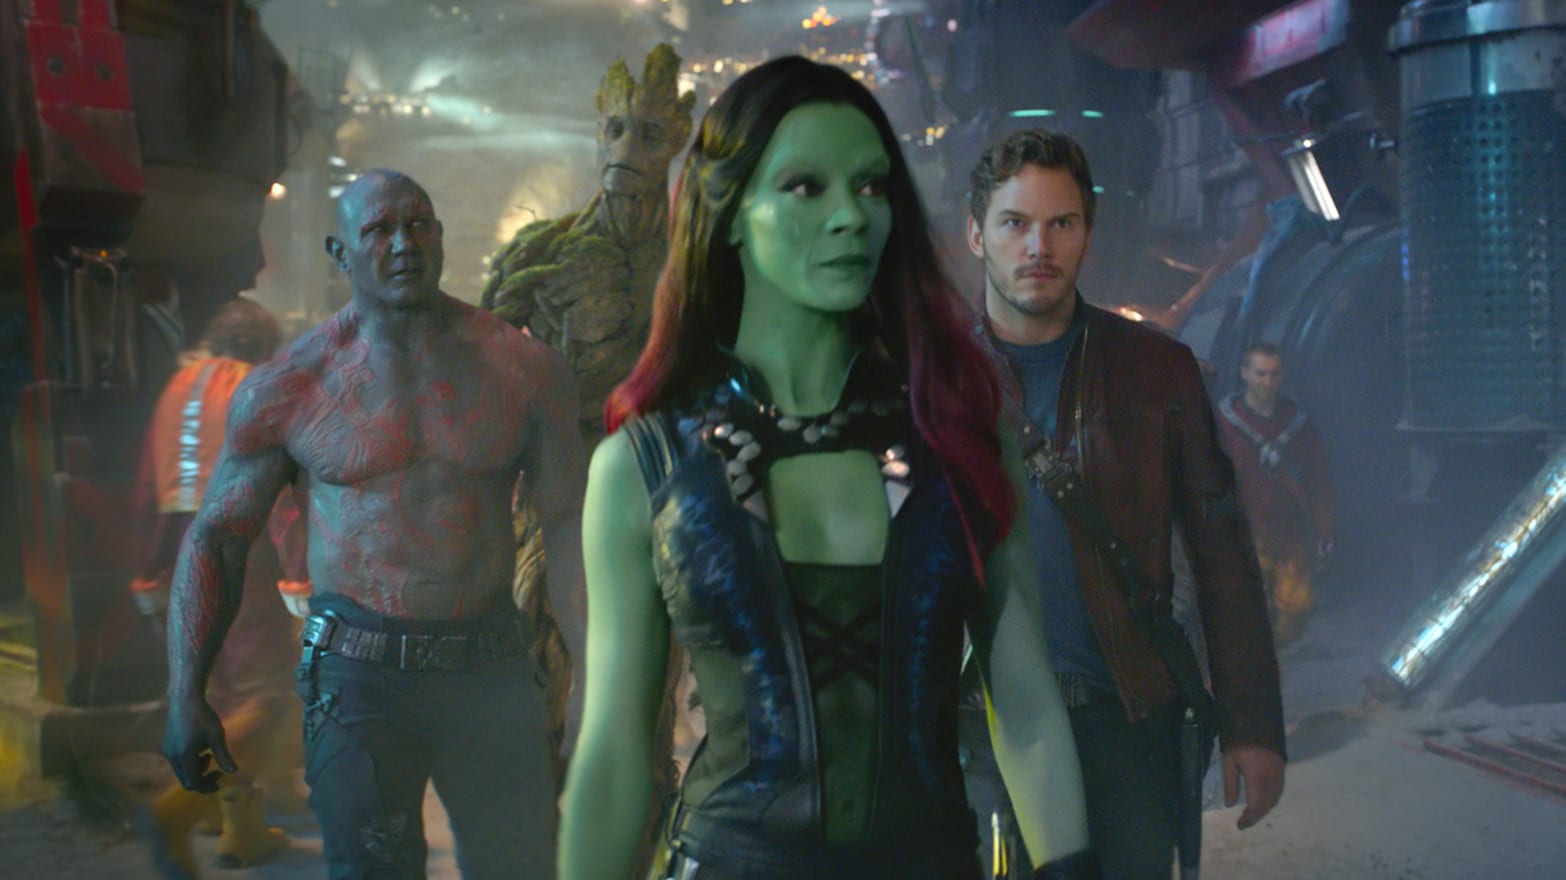 'Guardians of the Galaxy' Is Not a Watershed Moment for Women